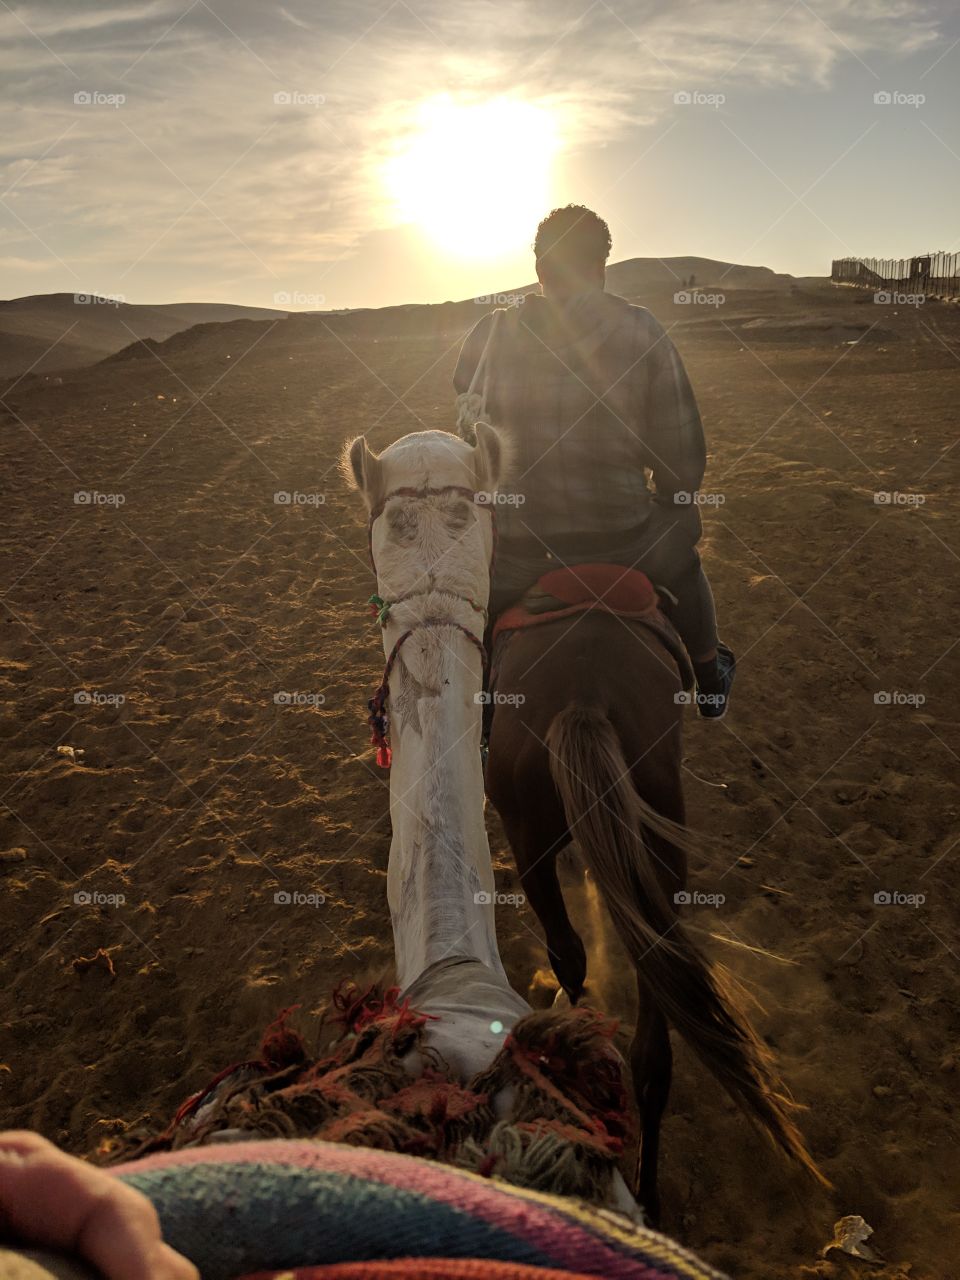 Being led into the deserts of Giza, Egypt on a camel.